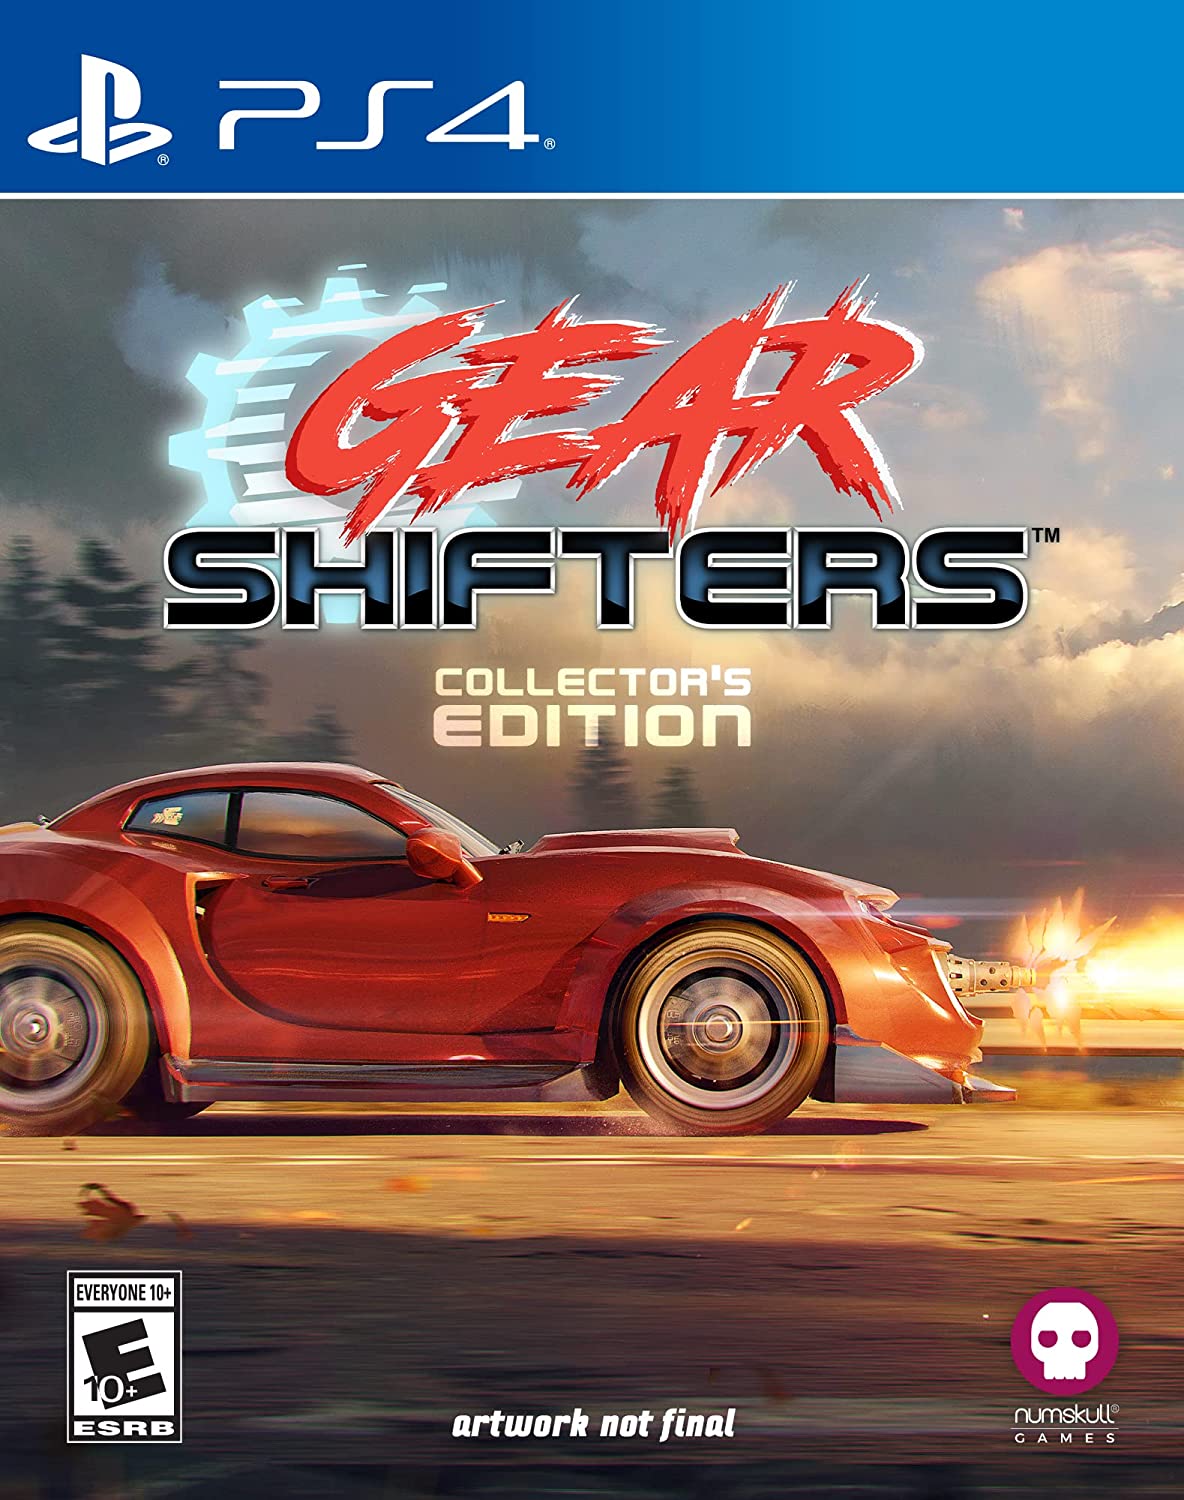 Gearshifters Collector S Edition PS4